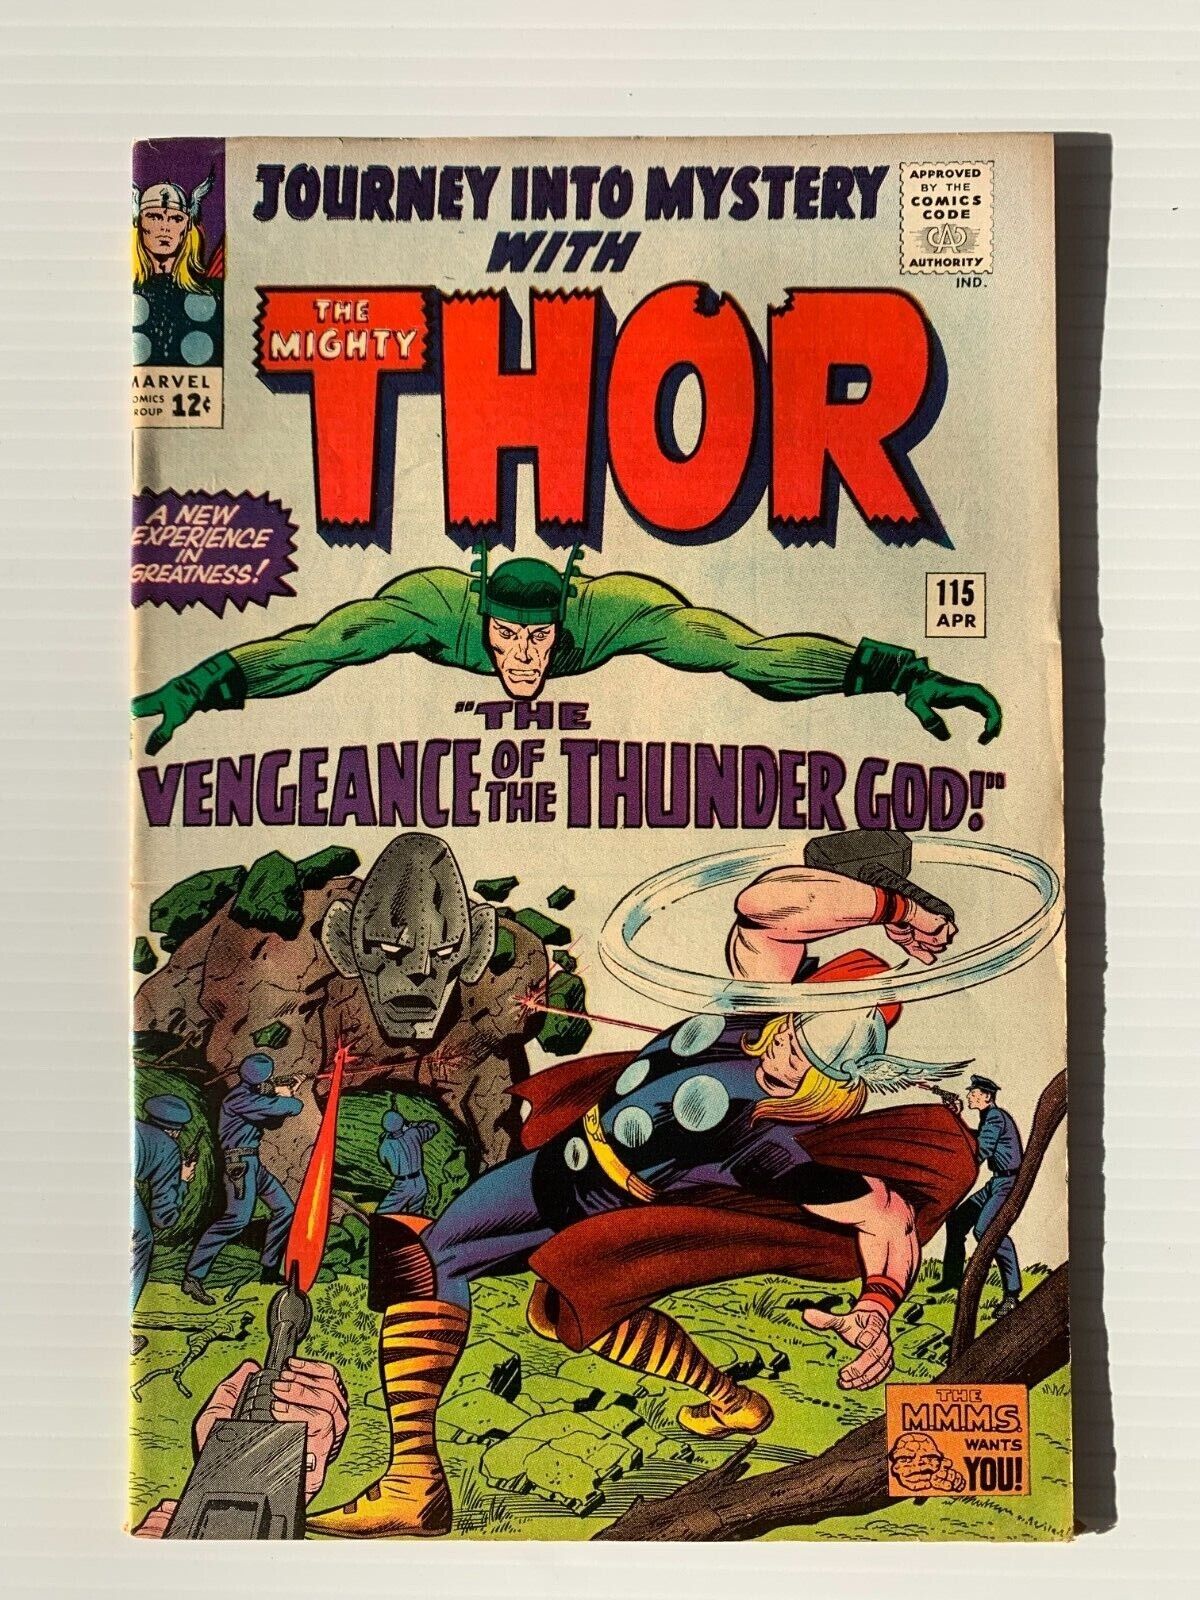 Journey into Mystery #115 1965 with The Mighty Thor 